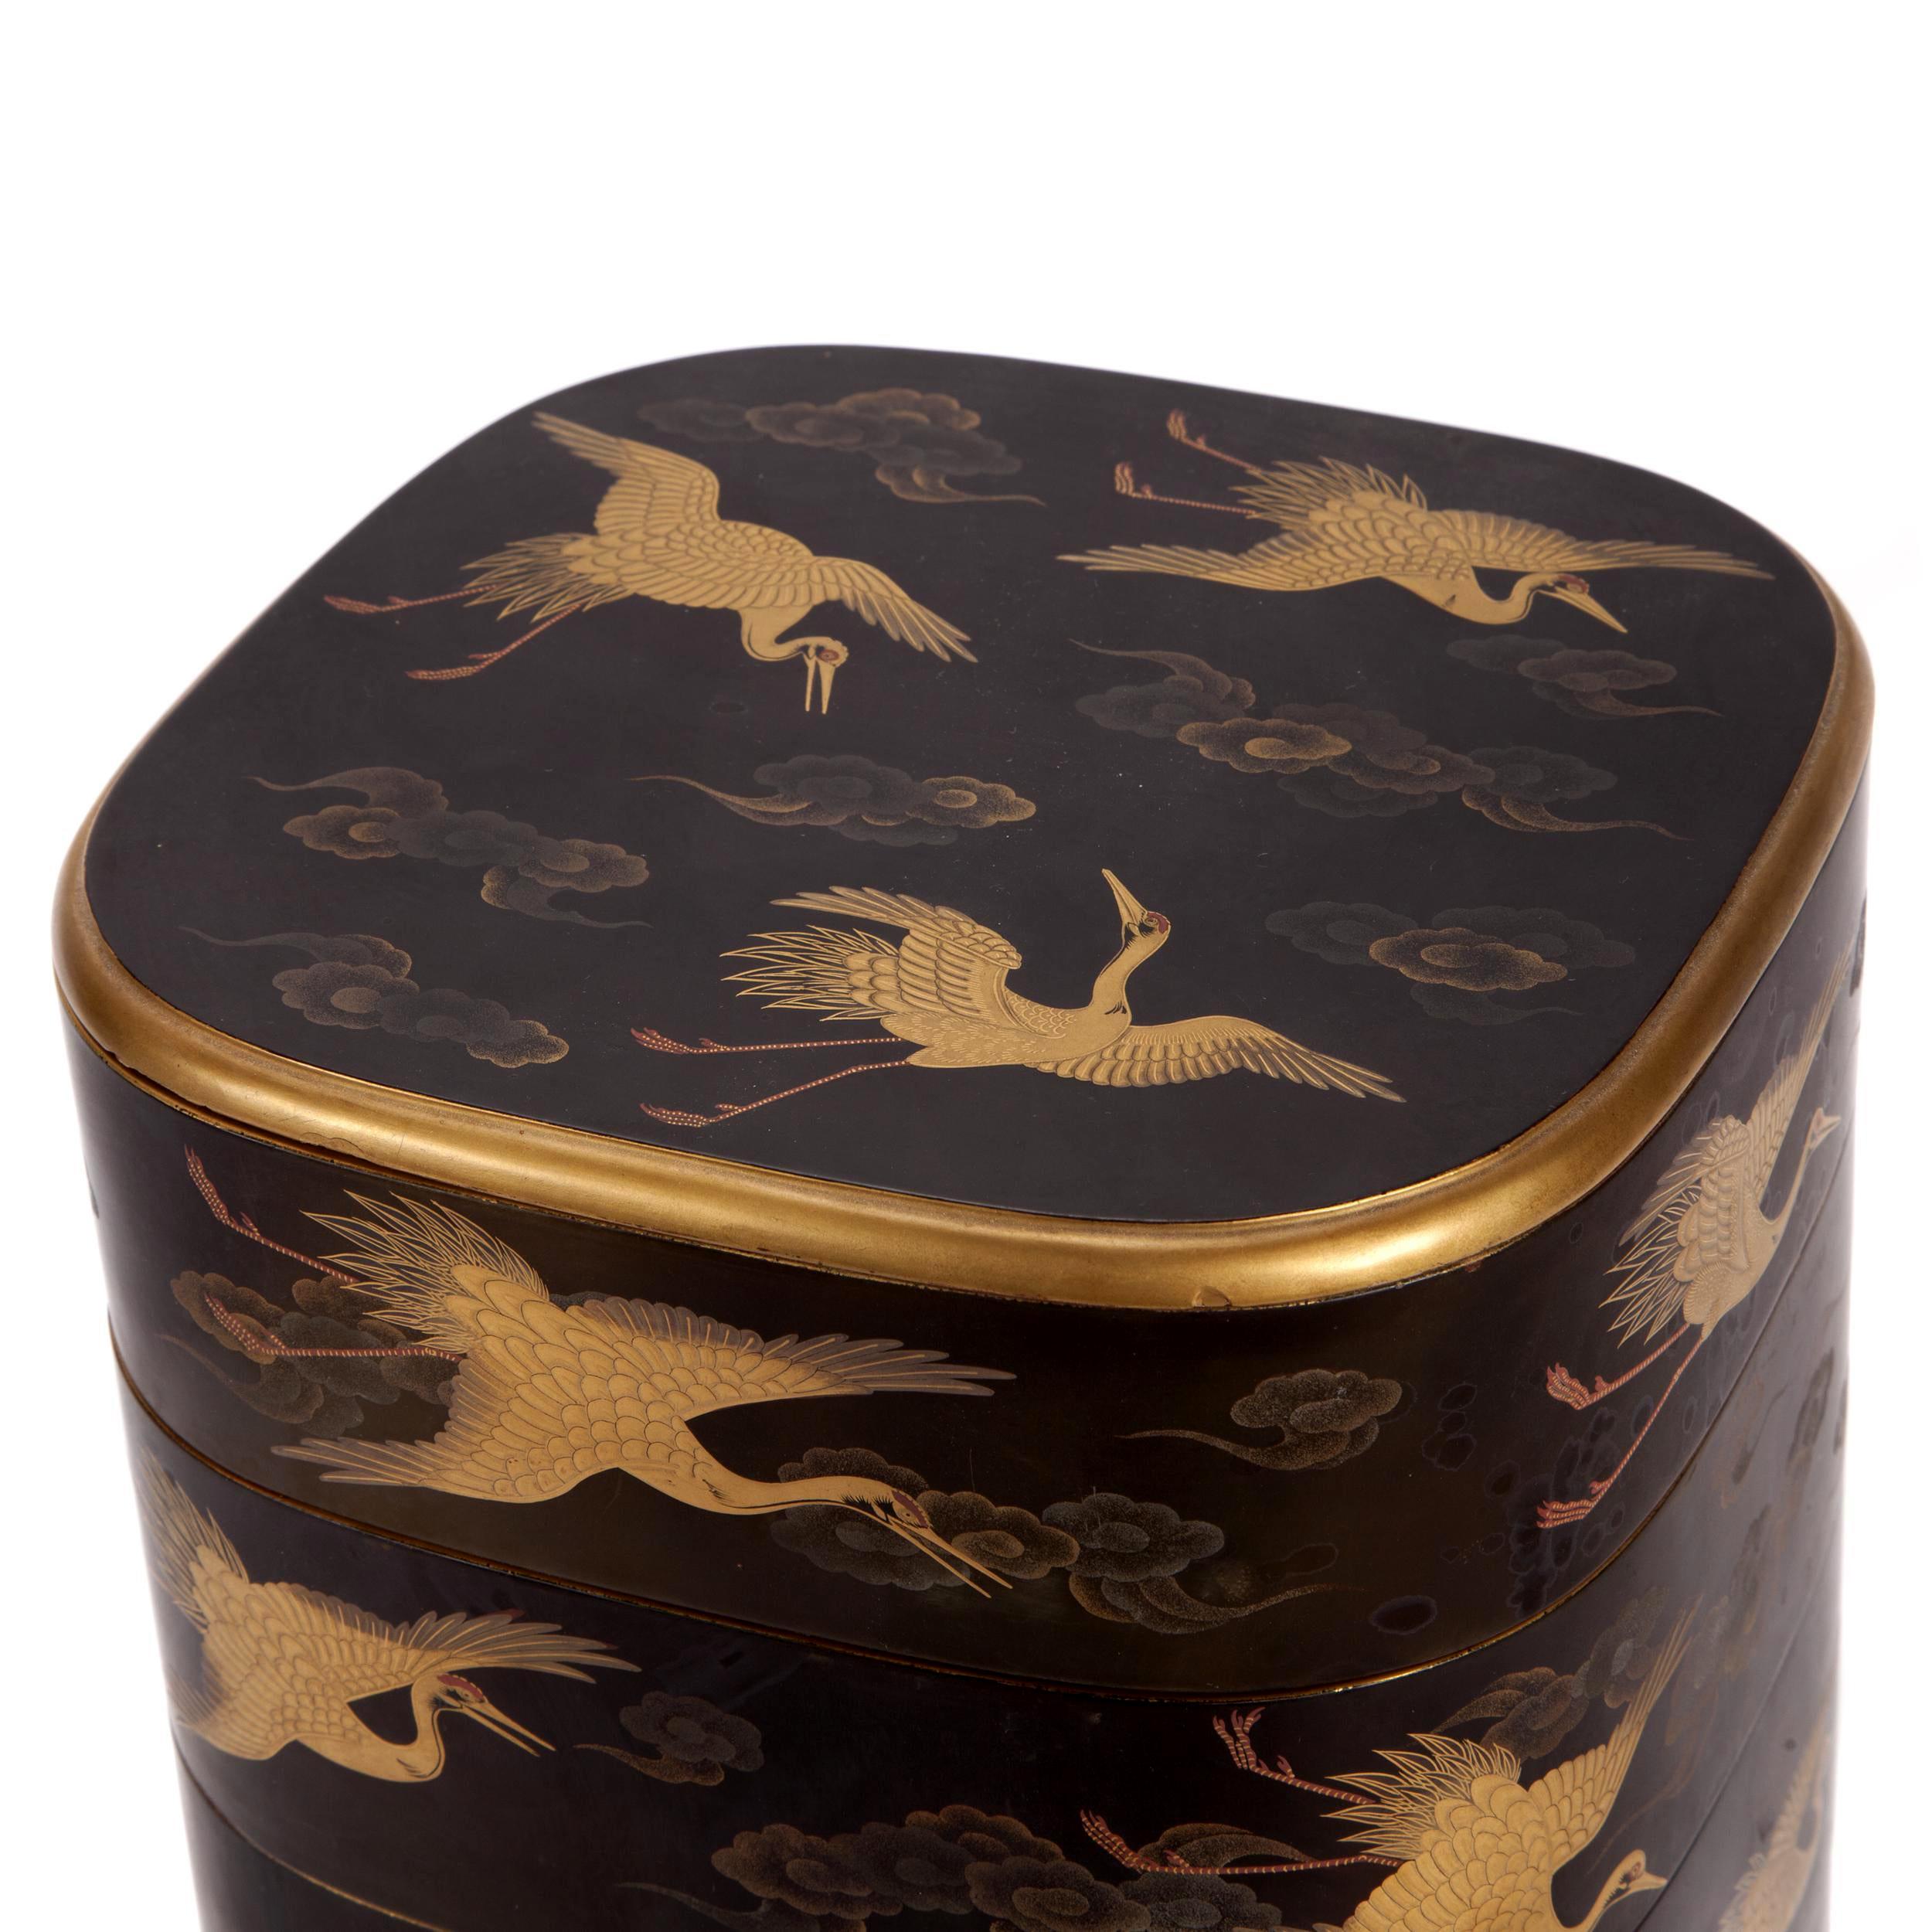 Japanese tier jubako box with four tiers circa early 20th century Meiji to Taisho period. The square boxes with rounded corner is finished in black urushi lacquer background. The surface was decorated with flying cranes among the scrolling clouds.